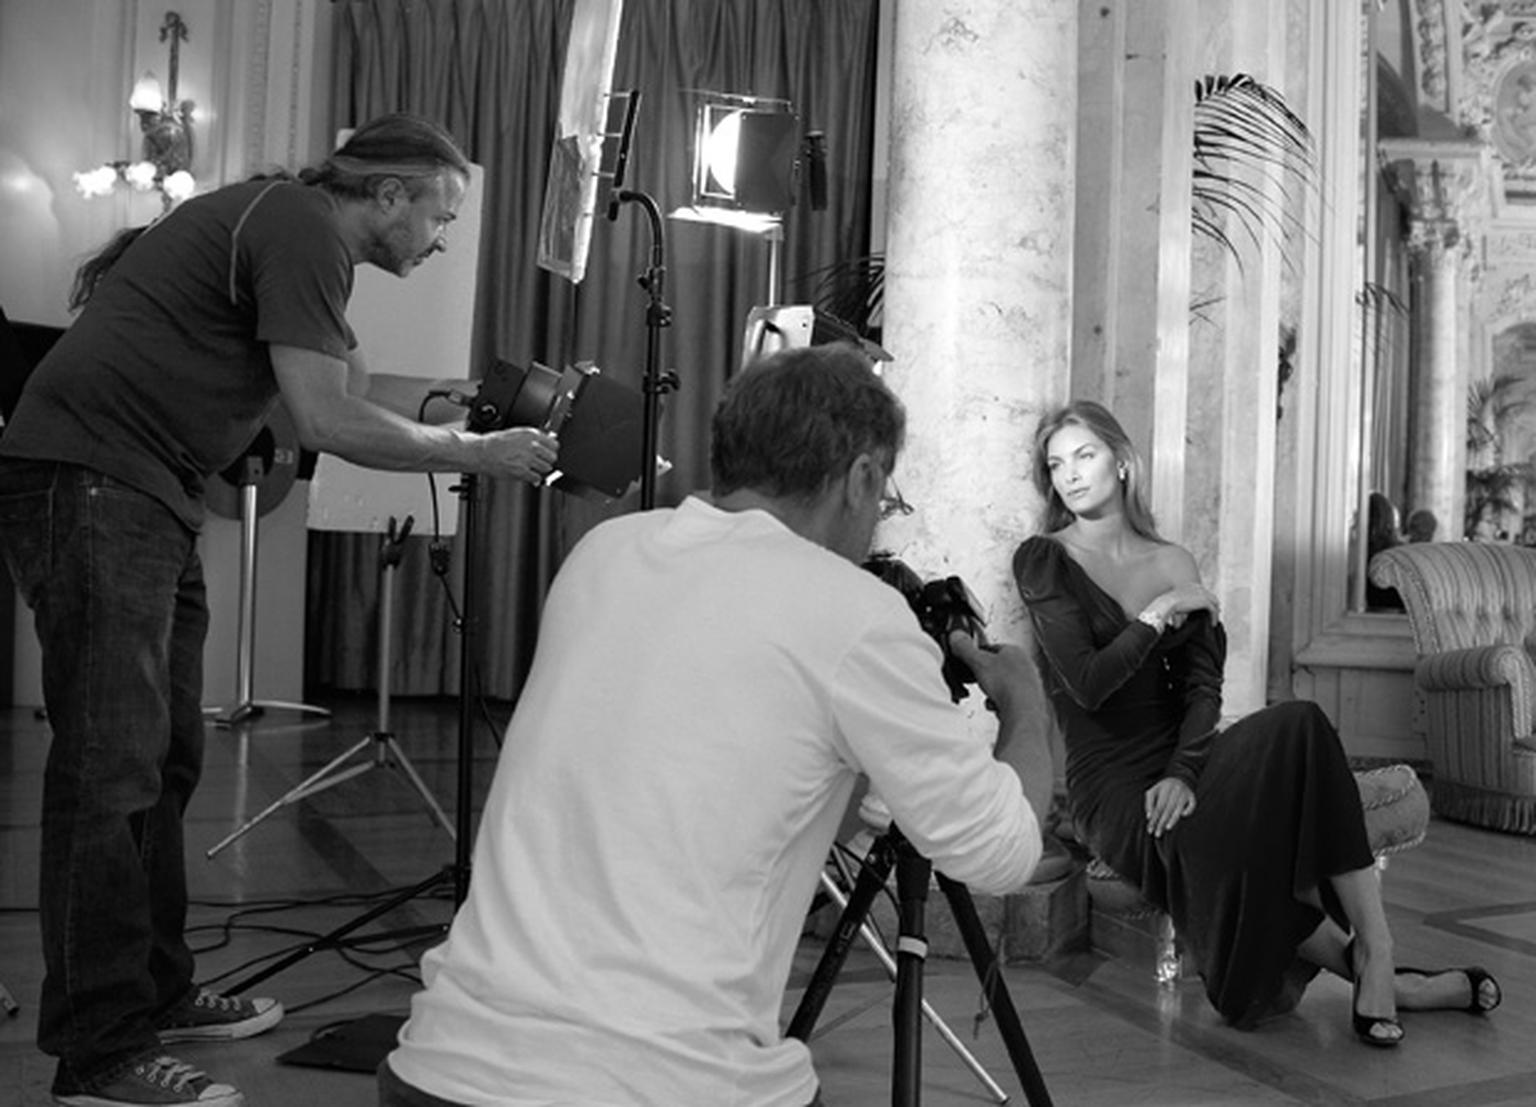 Photographer Christian Coigny and his  team working hard at a natural, spontaneous look